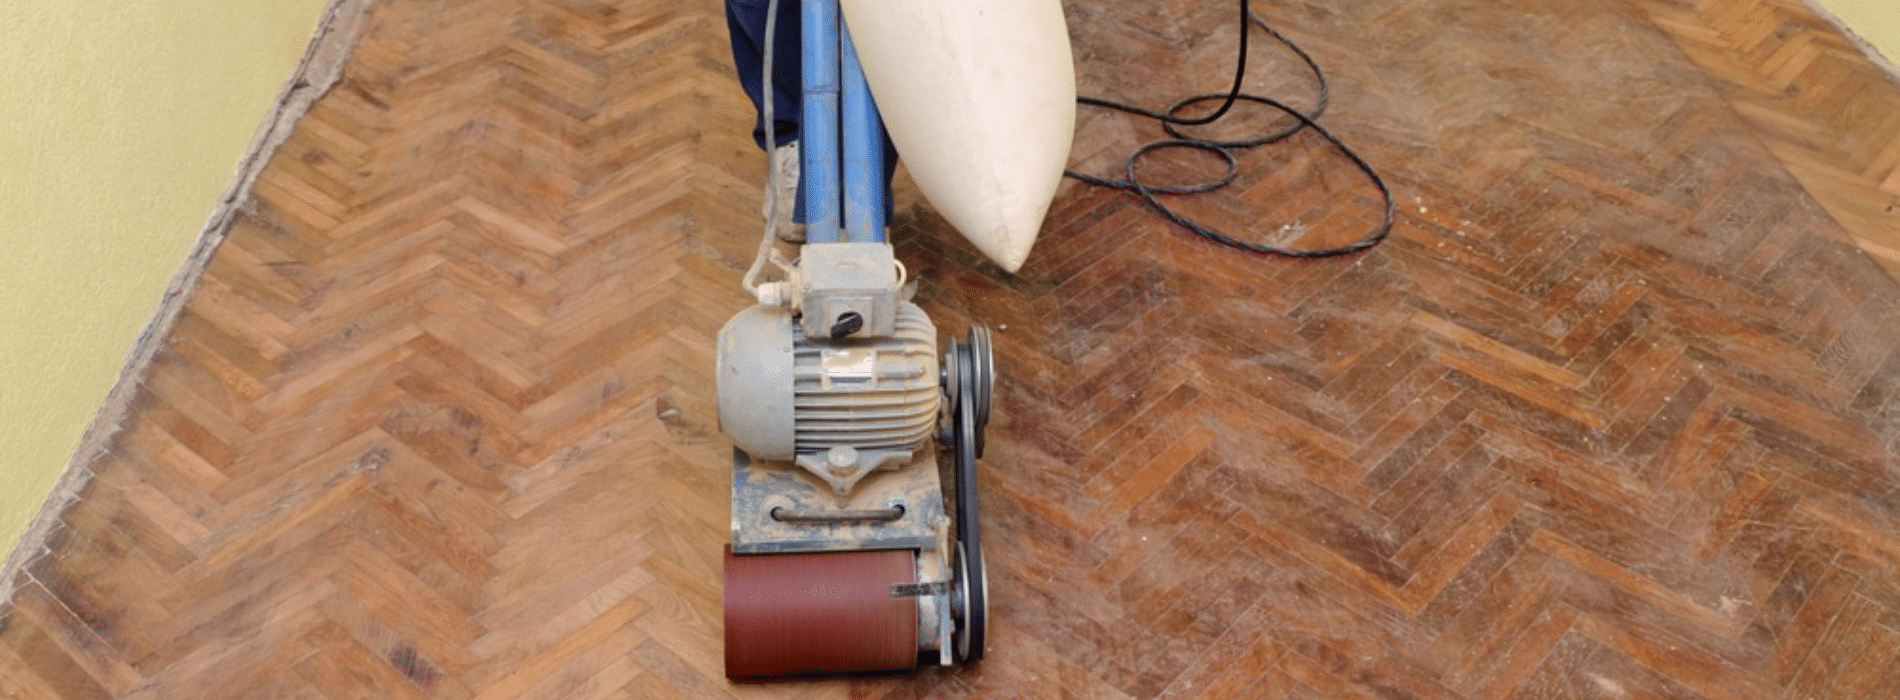 Mr Sander® in Woodford Green, IG8, employ the powerful Bona Belt Effect sander (2.2 kW) to sand herringbone floors. Operating at 230V and 50Hz/60Hz, this 250x750 mm sander is connected to a dust extraction system featuring a HEPA filter, guaranteeing a thorough and efficient result.